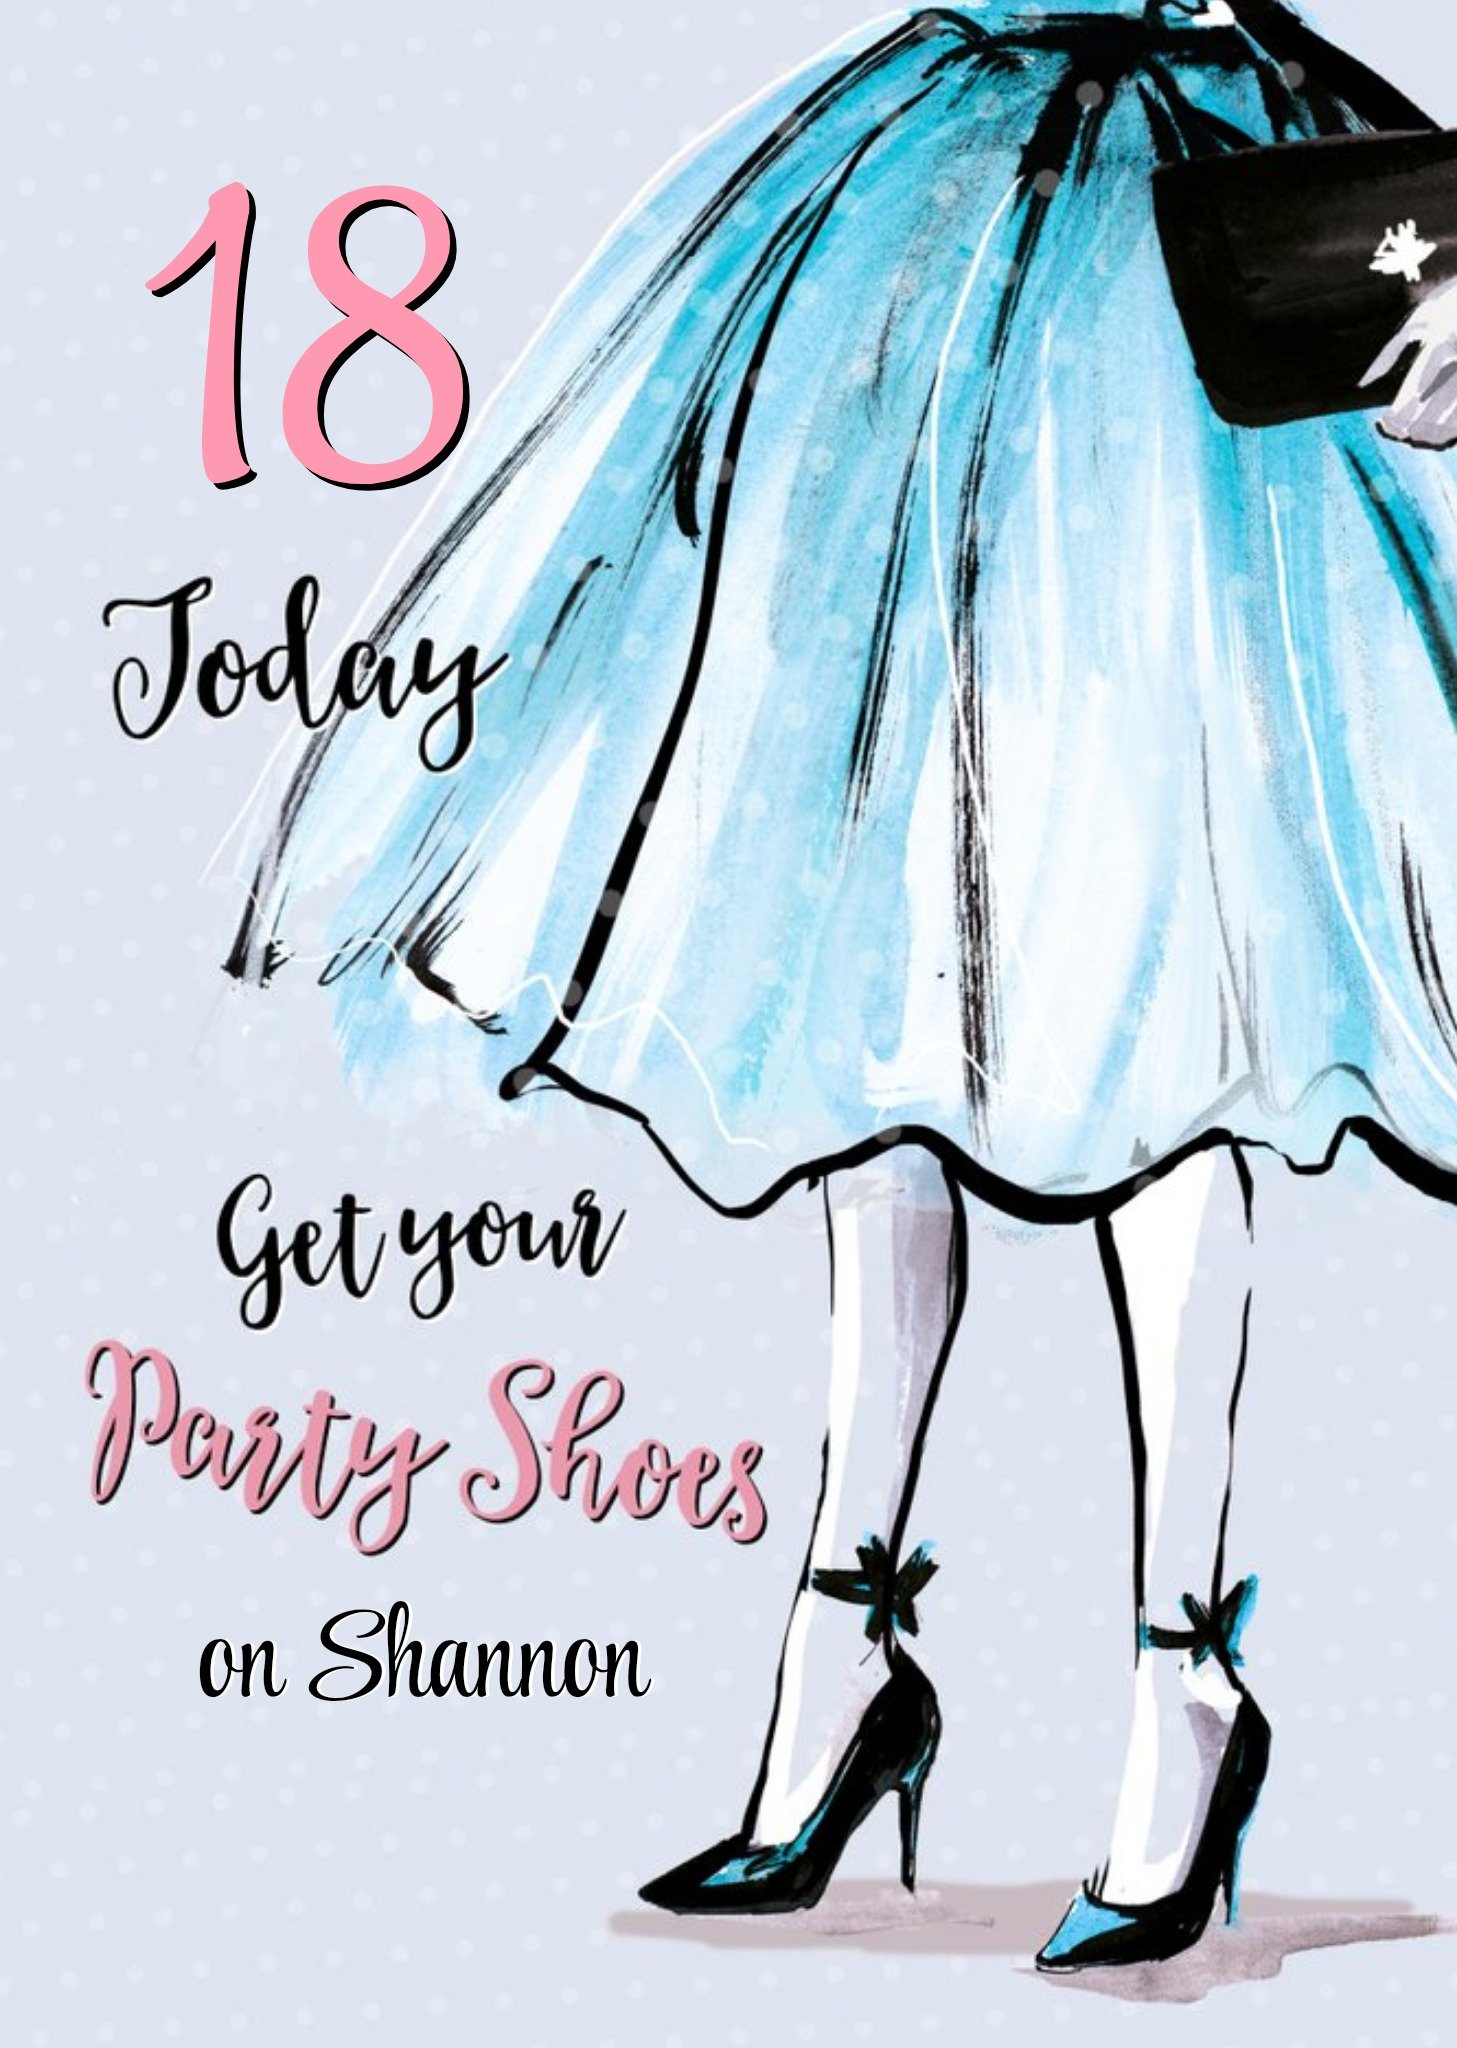 Moonpig Fashion Illustration Birthday Card Get Your Party Shoes On, Large